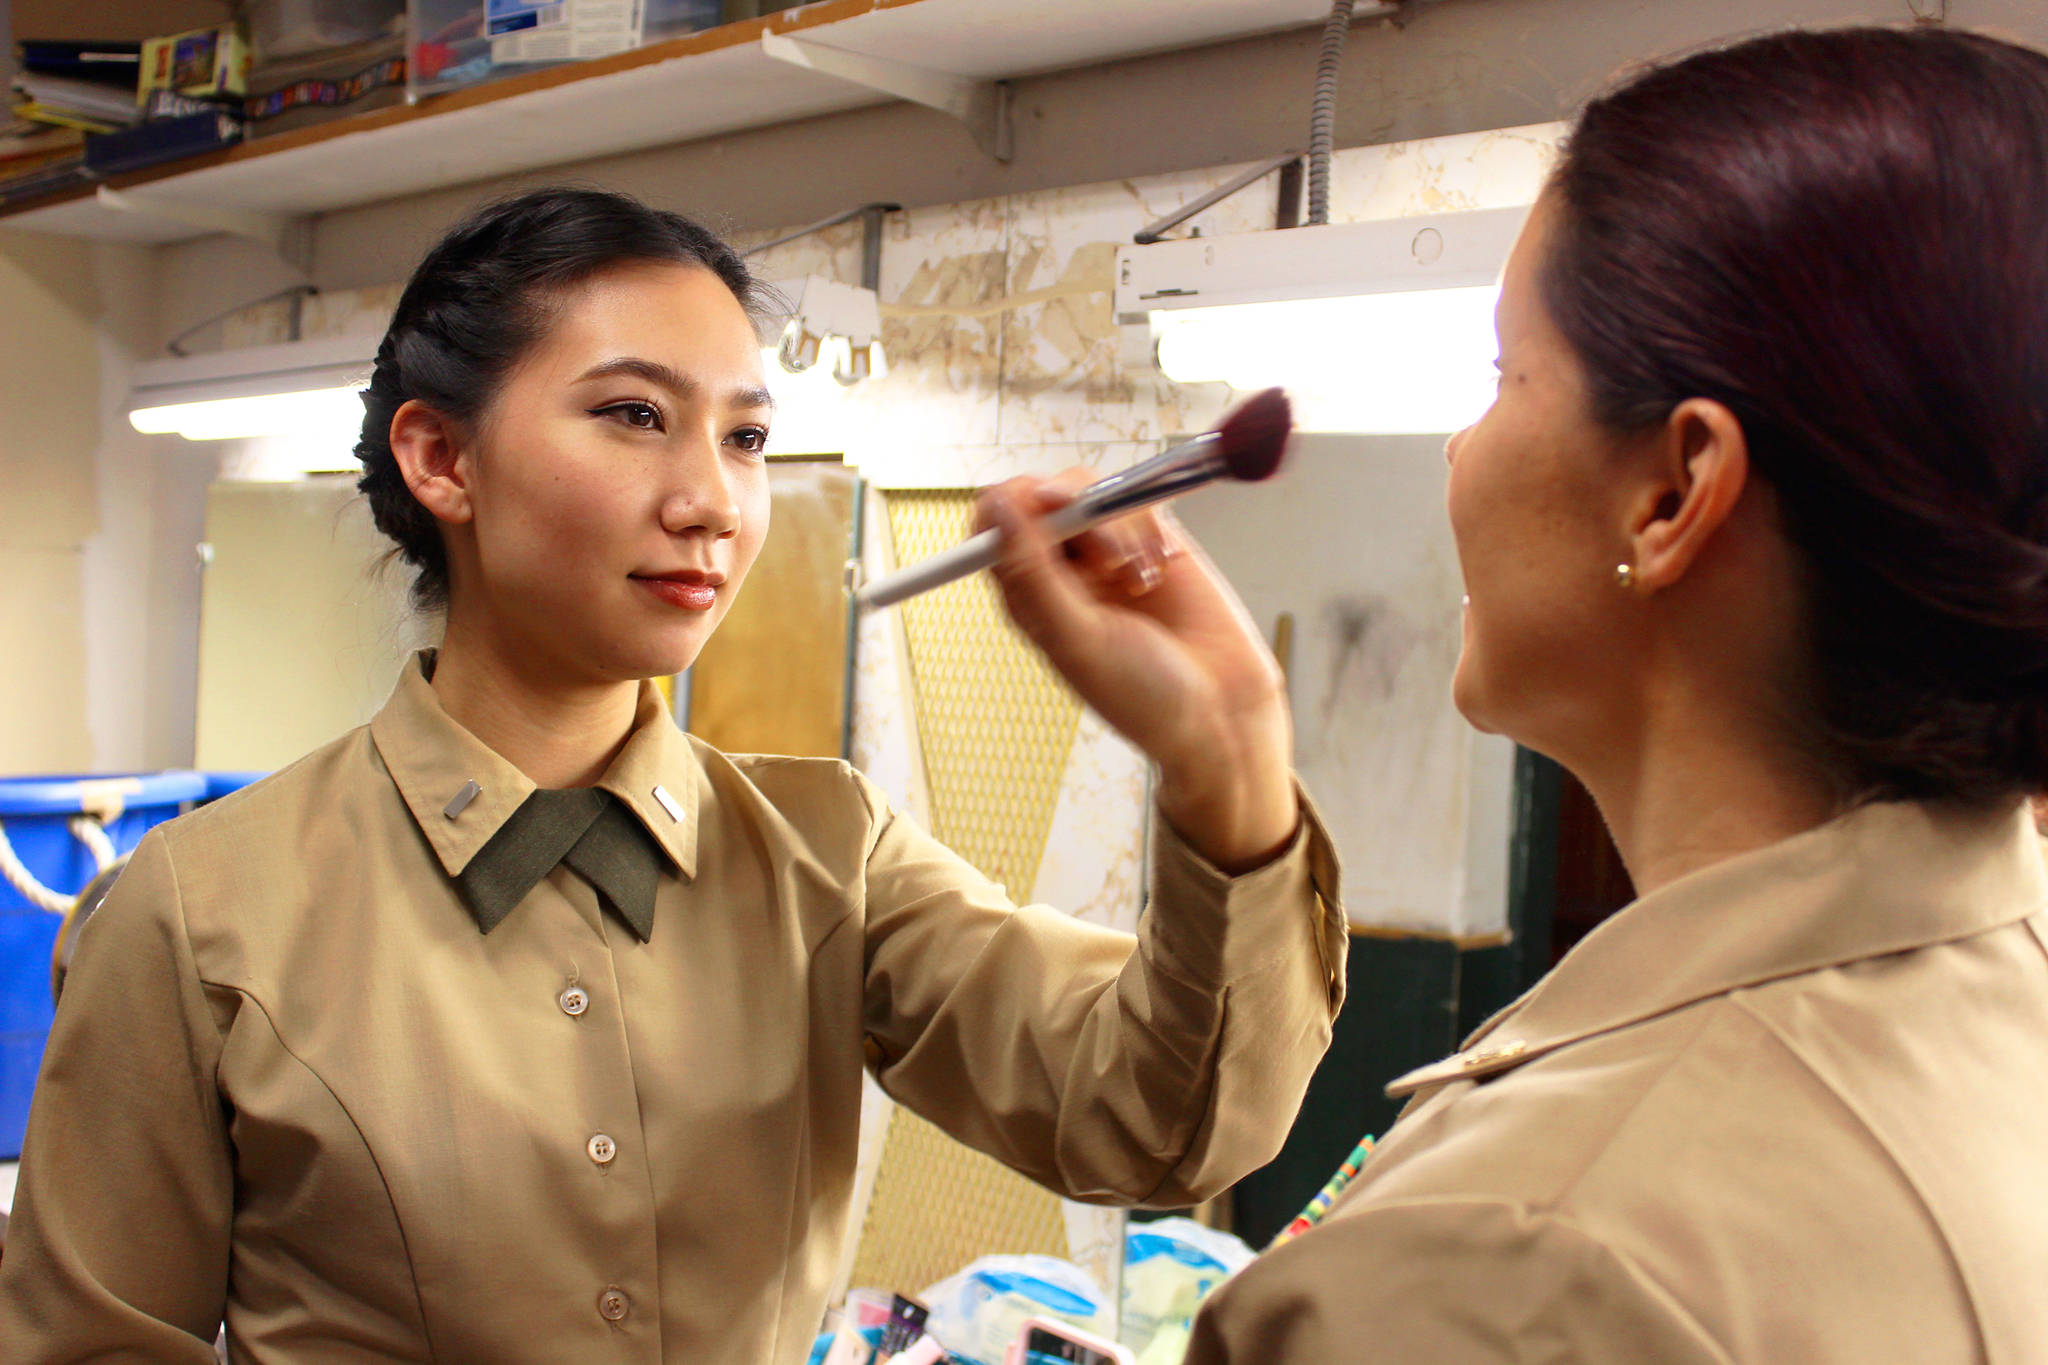 Moriah Sittner applies powder to the face of Tara Hizon before a rehearsal of “A Few Good Men” at Whidbey Playhouse in Oak Harbor. The actresses play lead characters in the military drama that is set in Guantanamo Bay, Cuba.                                Photo by Patricia Guthrie/ Whidbey News-Times